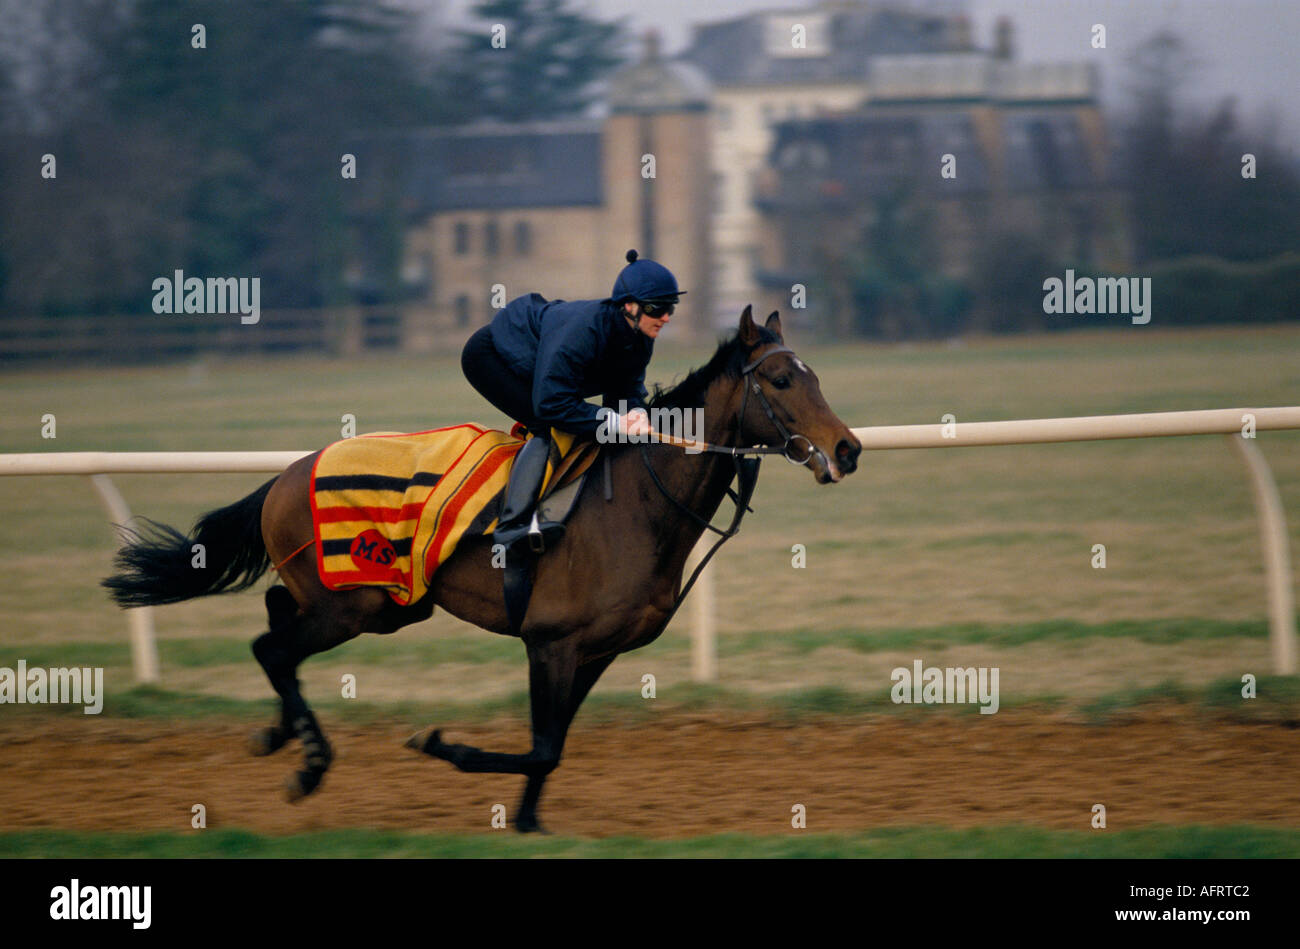 Jockey and thoroughbred race horse from Sir Michael Stoutes Yard, morning gallops on Warren Hill, Newmarket Heath, Suffolk 1990s 1993 UK  HOMER SYKES. Stock Photo